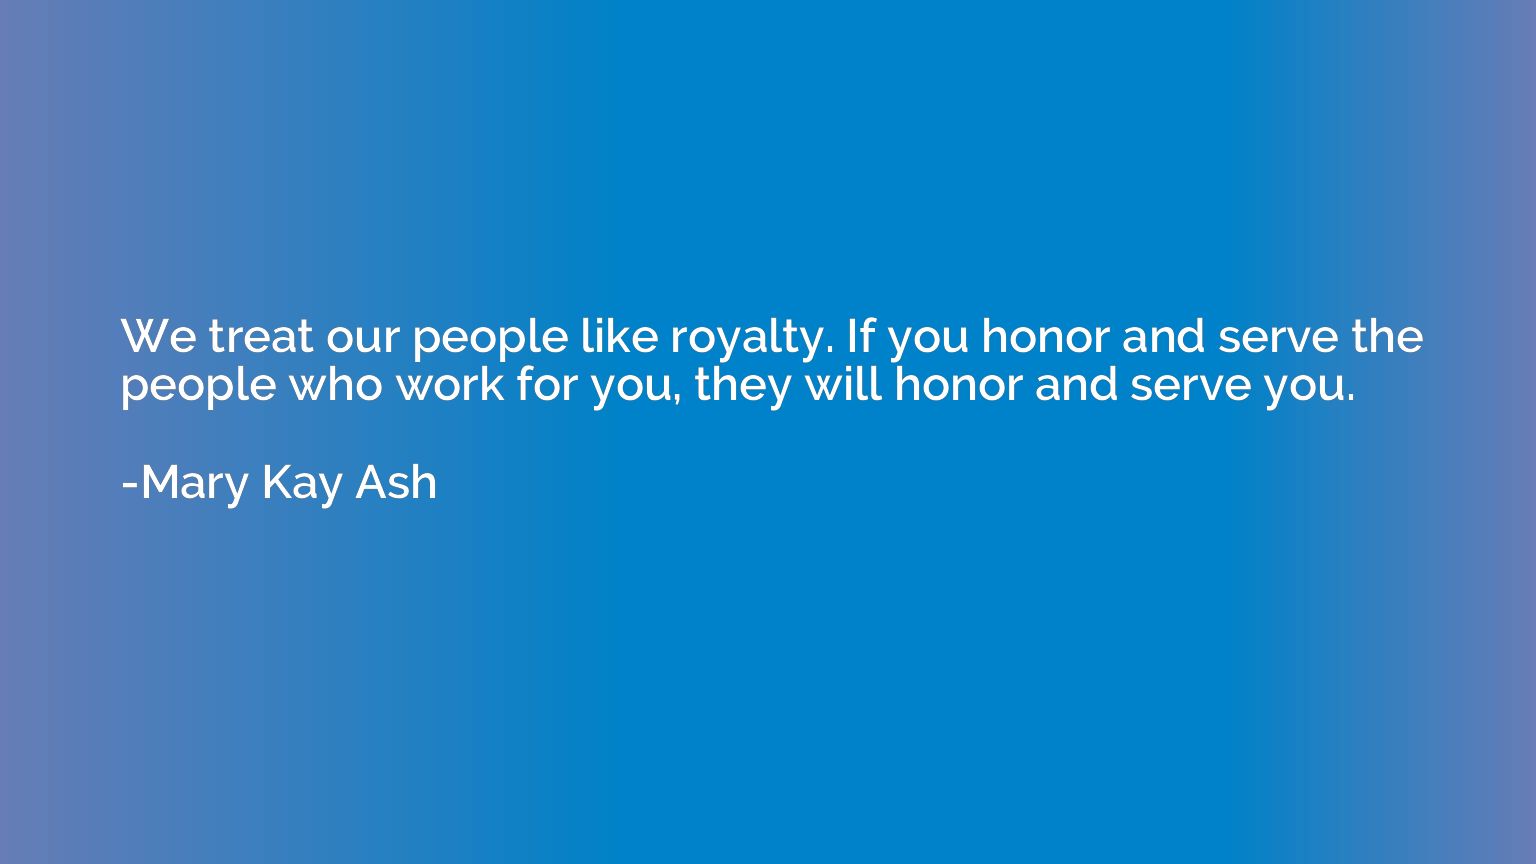 We treat our people like royalty. If you honor and serve the